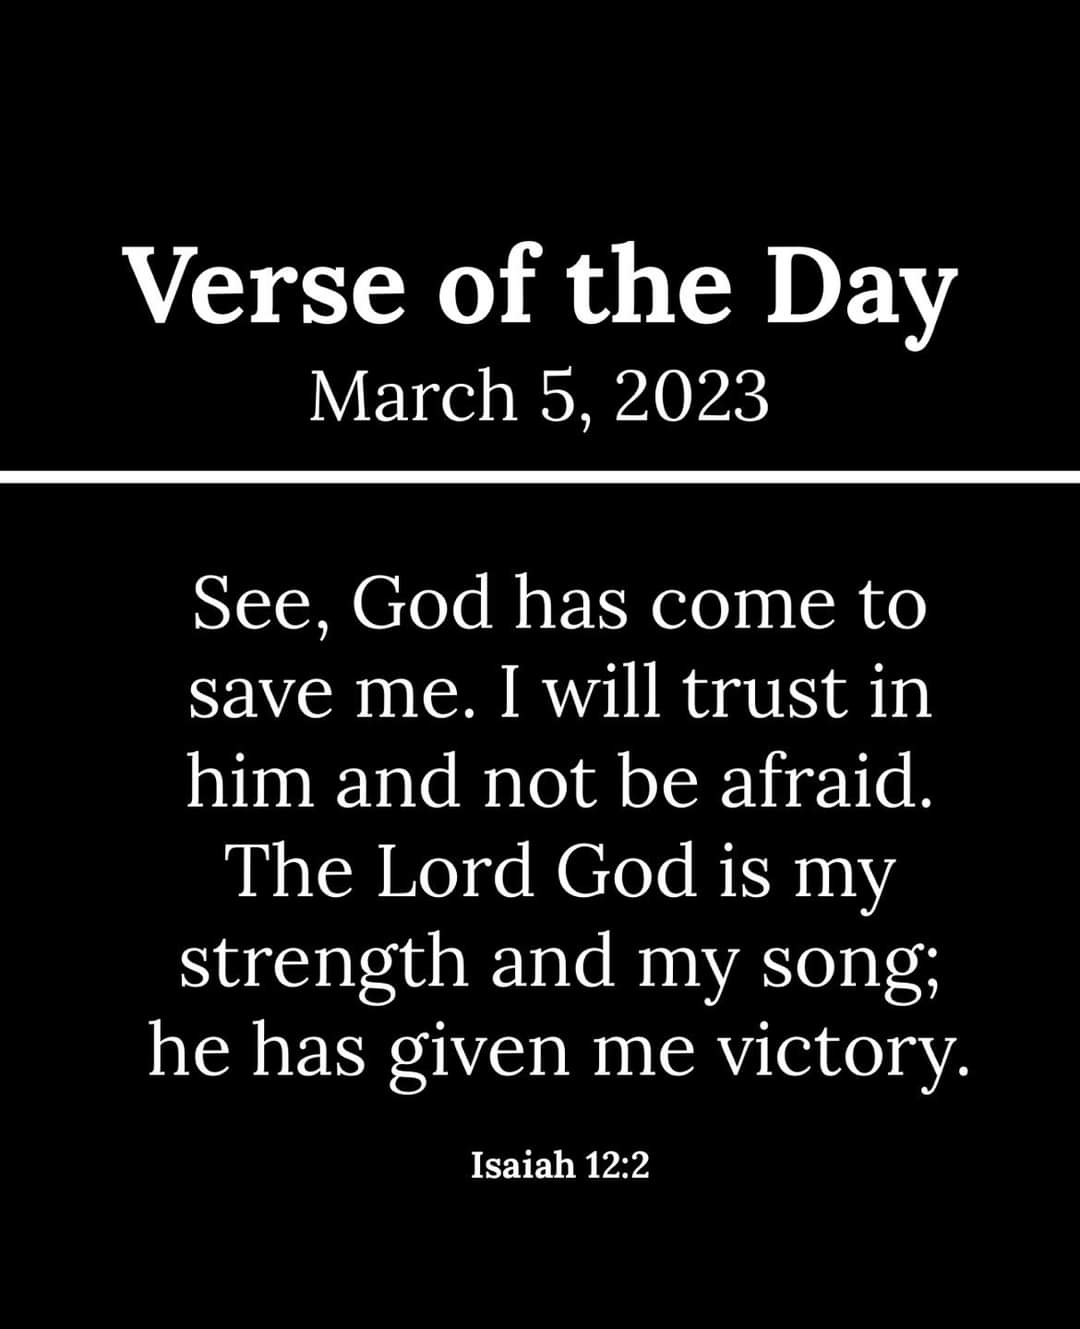 Verse of the March 5, 2023 See, God has come to save me_ Iwill trust in him and not be afraid. The Lord God is my strength and my song; he has given me victory: Isaiah 12.2 Day